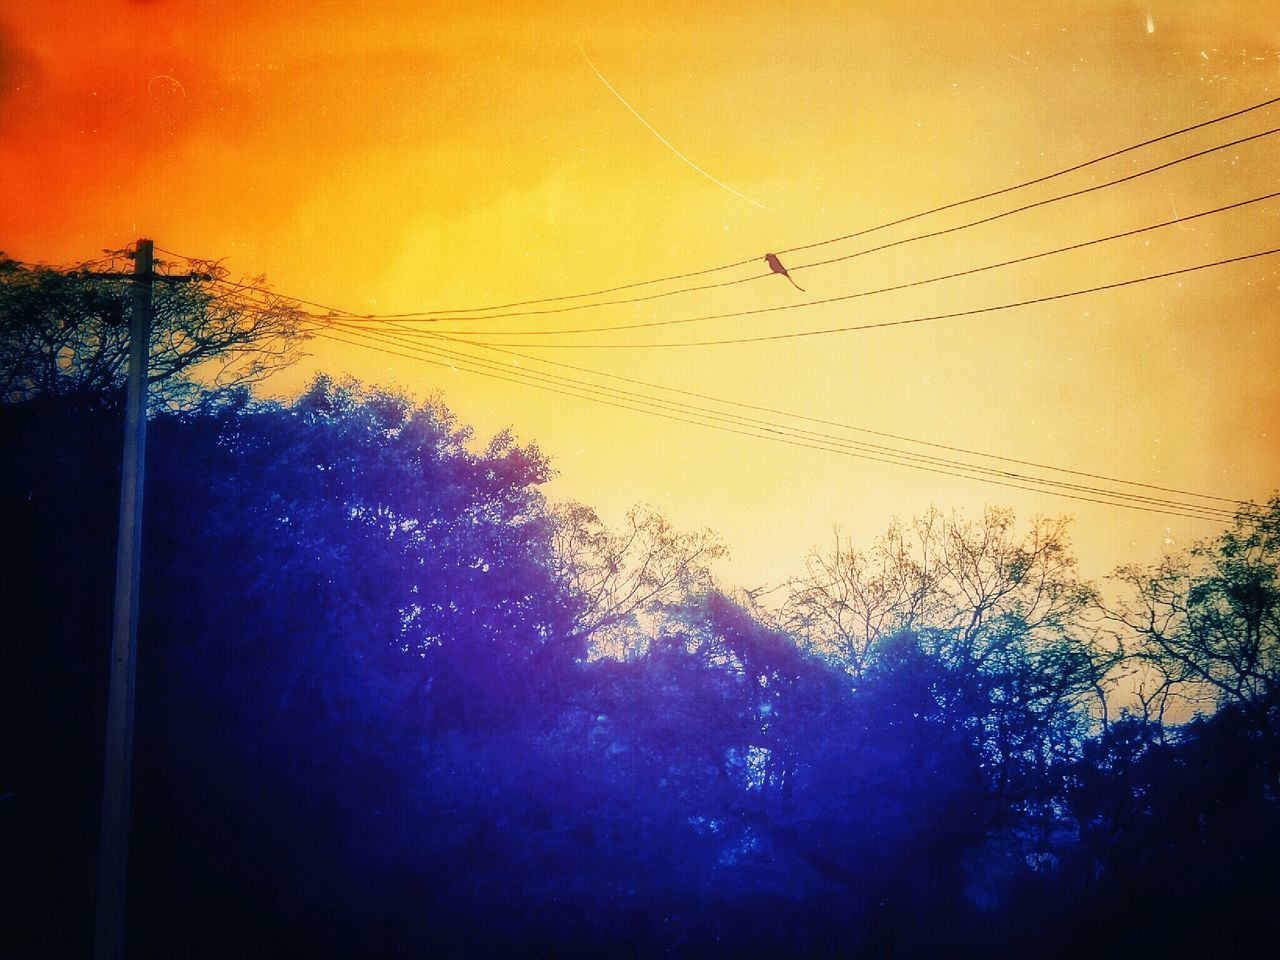 sunset, power line, silhouette, sky, low angle view, electricity pylon, electricity, power supply, orange color, fuel and power generation, cable, nature, tree, technology, dusk, connection, outdoors, beauty in nature, no people, built structure